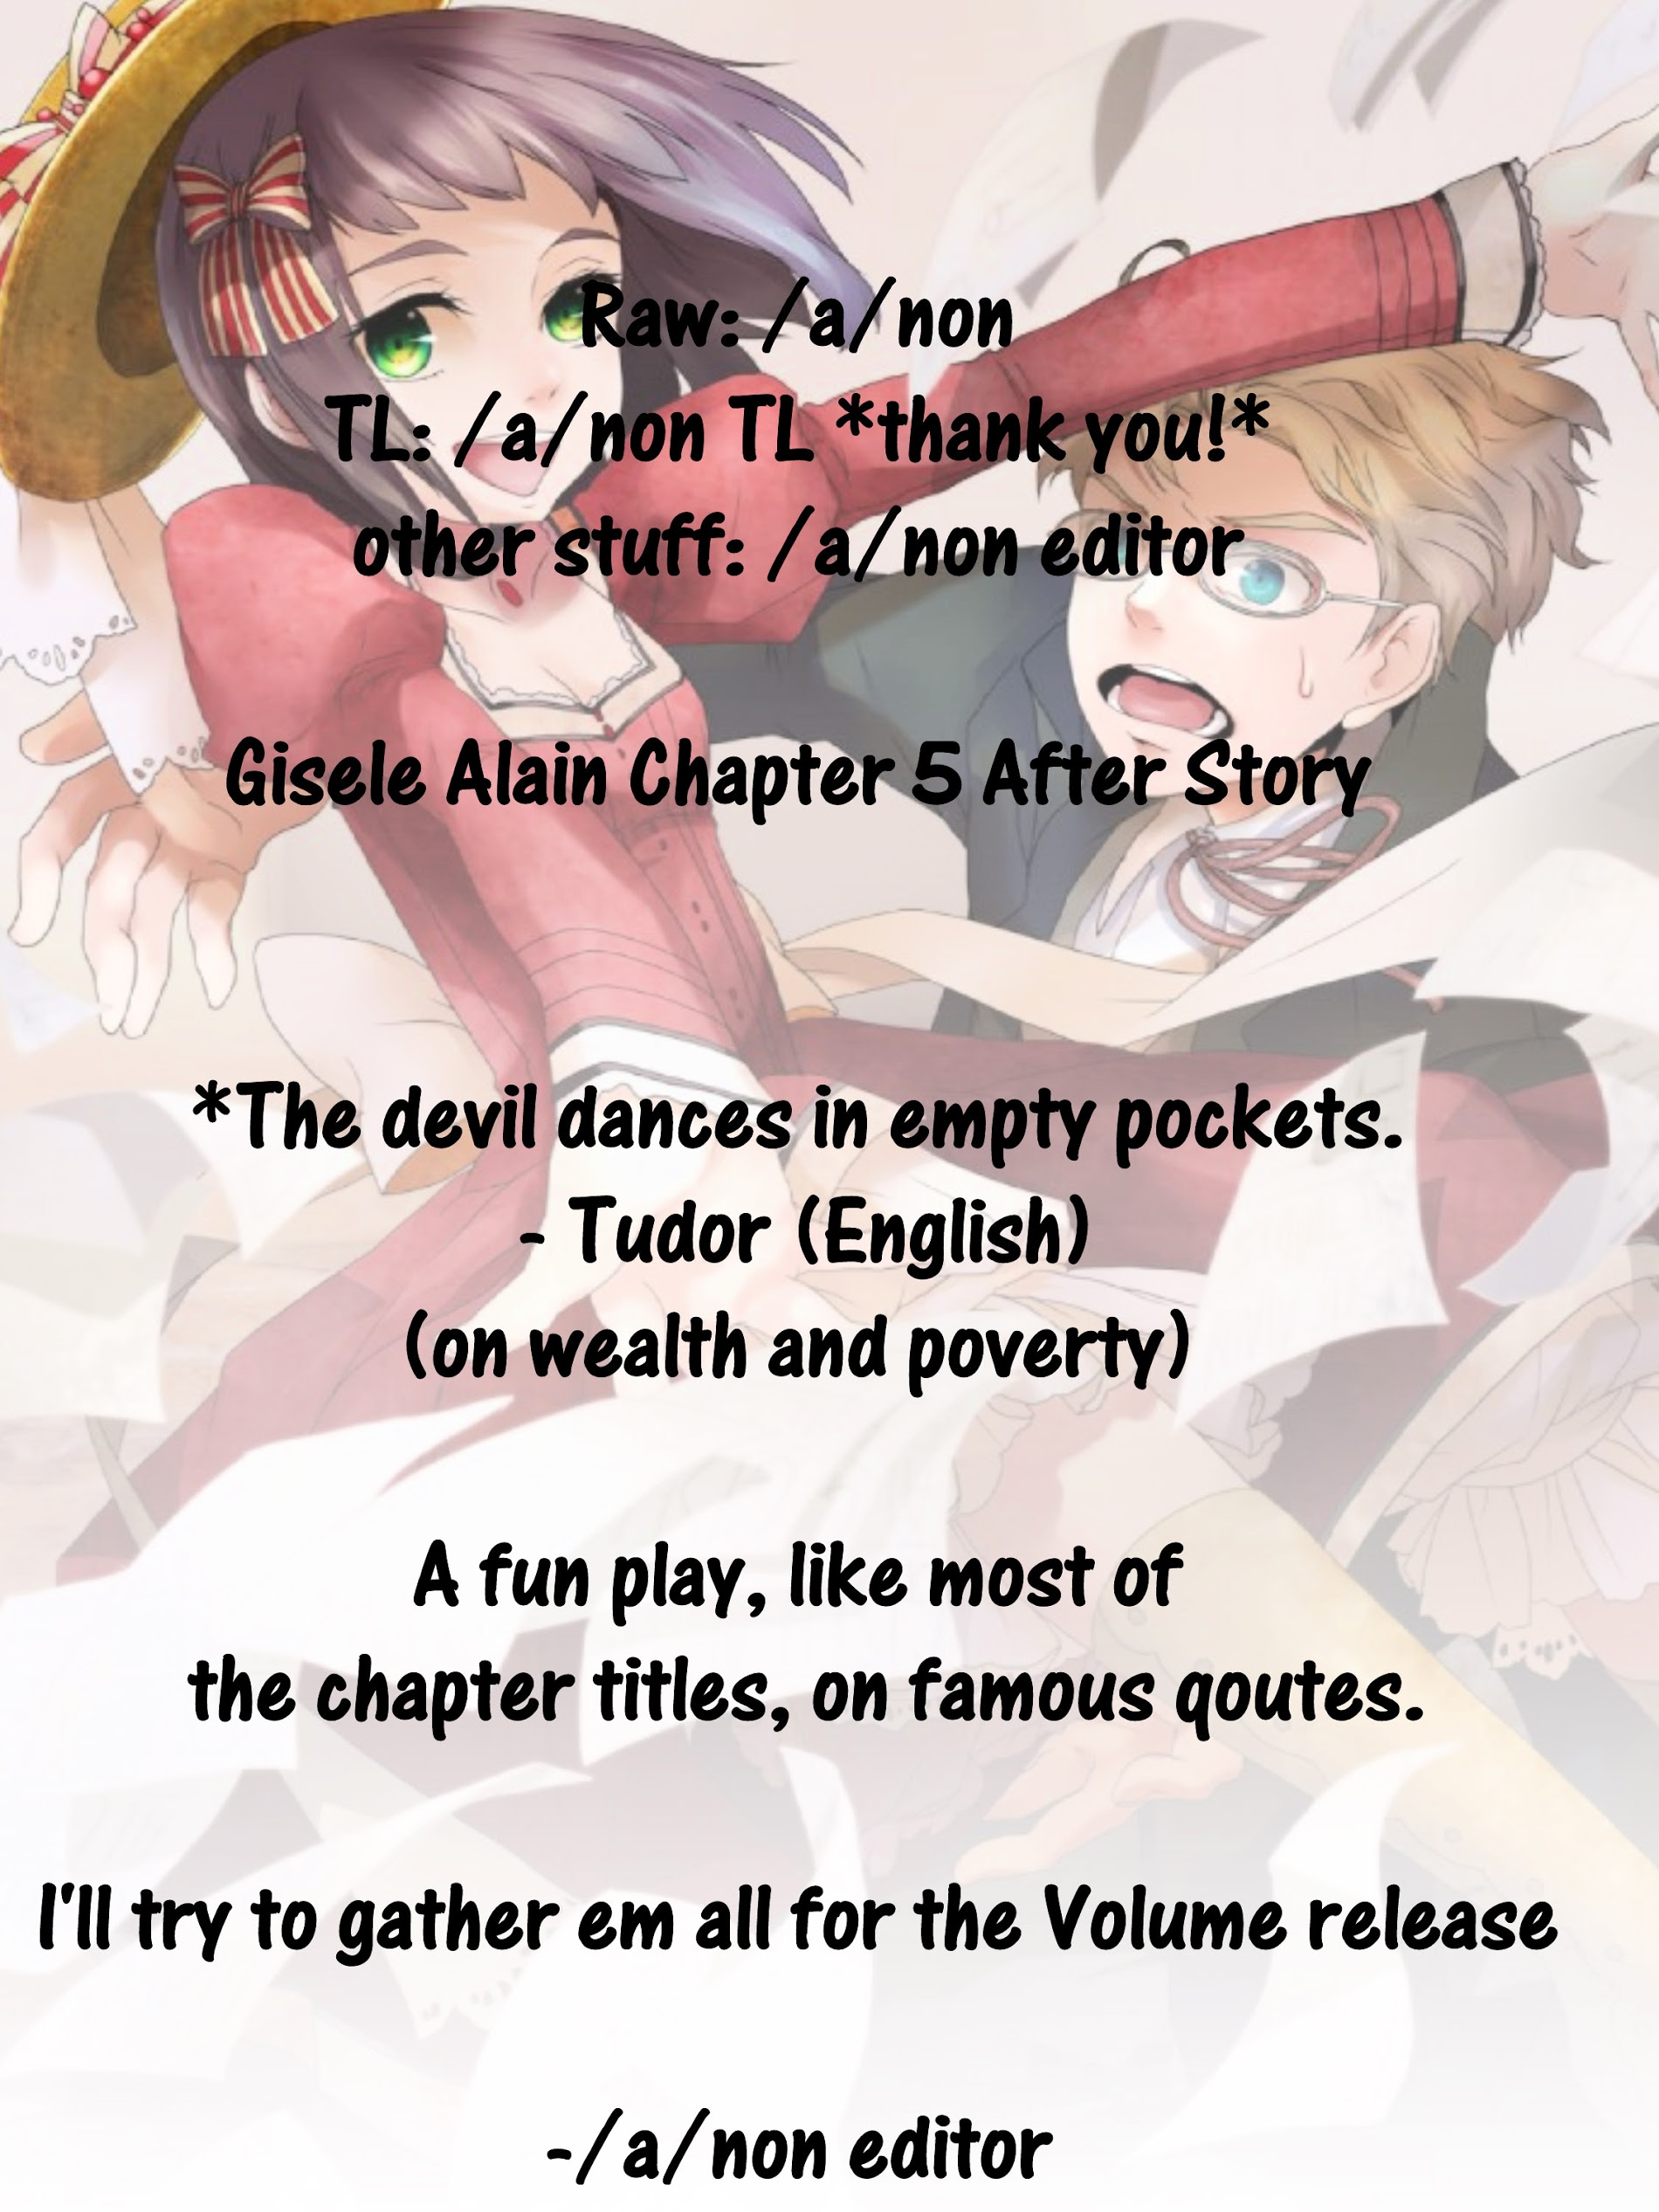 Gisele Alain Vol.1 Chapter Extra V2 : A Devil Dances In The Sky S Pocket? - Picture 1